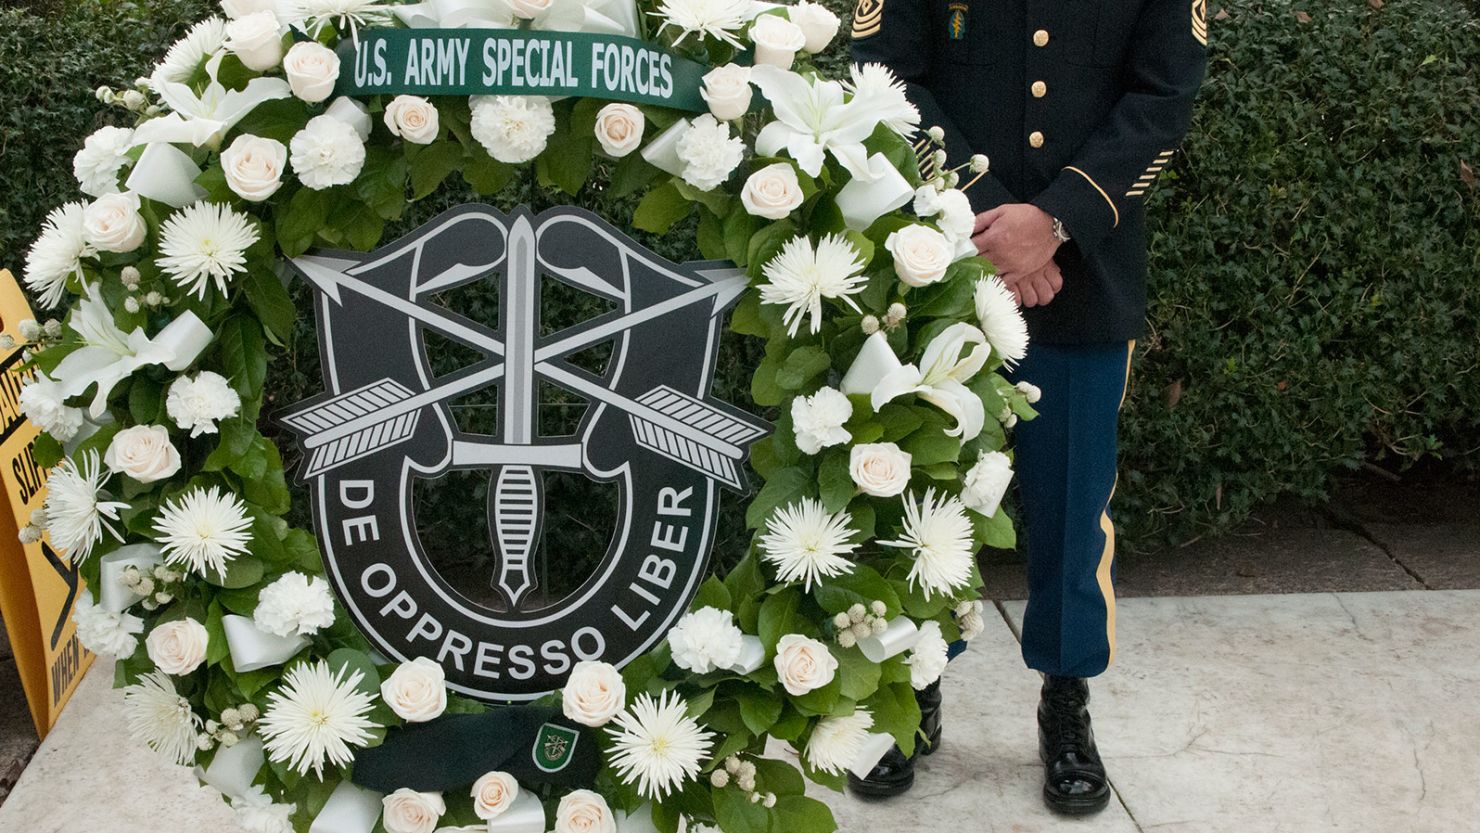 A wreath with a Latin saying that means "to liberate the oppressed" commemorates Army Special Forces